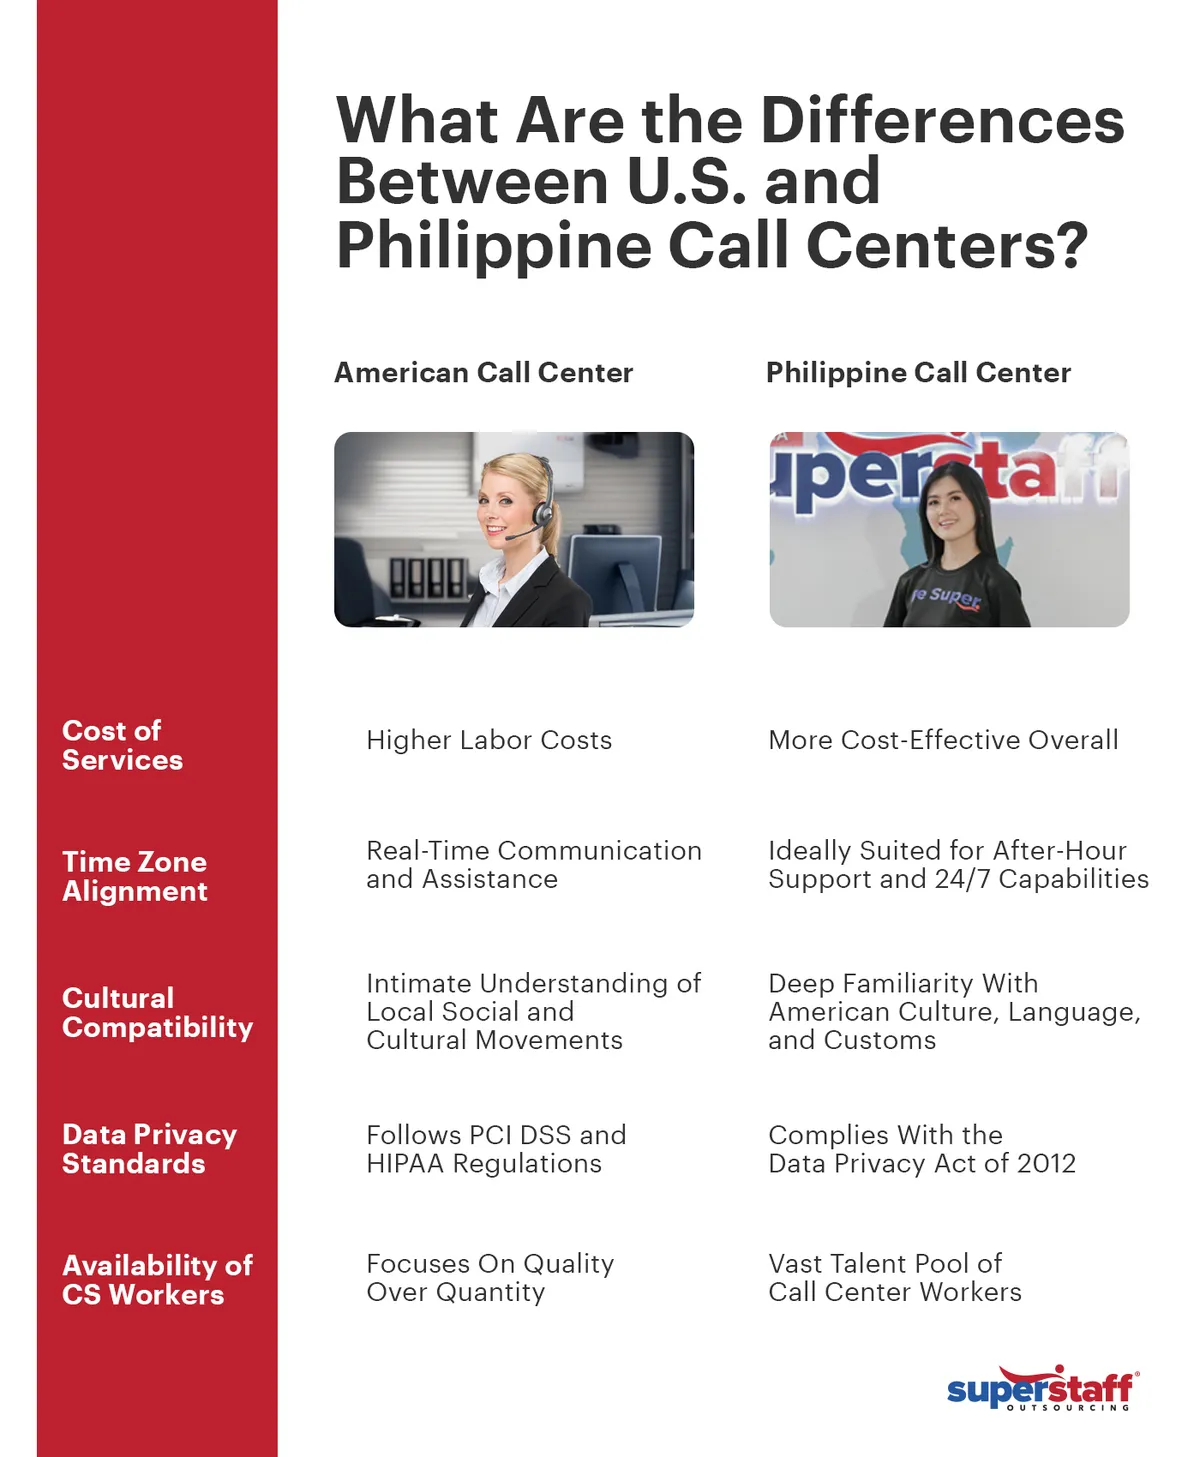 An infographic shows the differences between U.S. and Philippine call center services